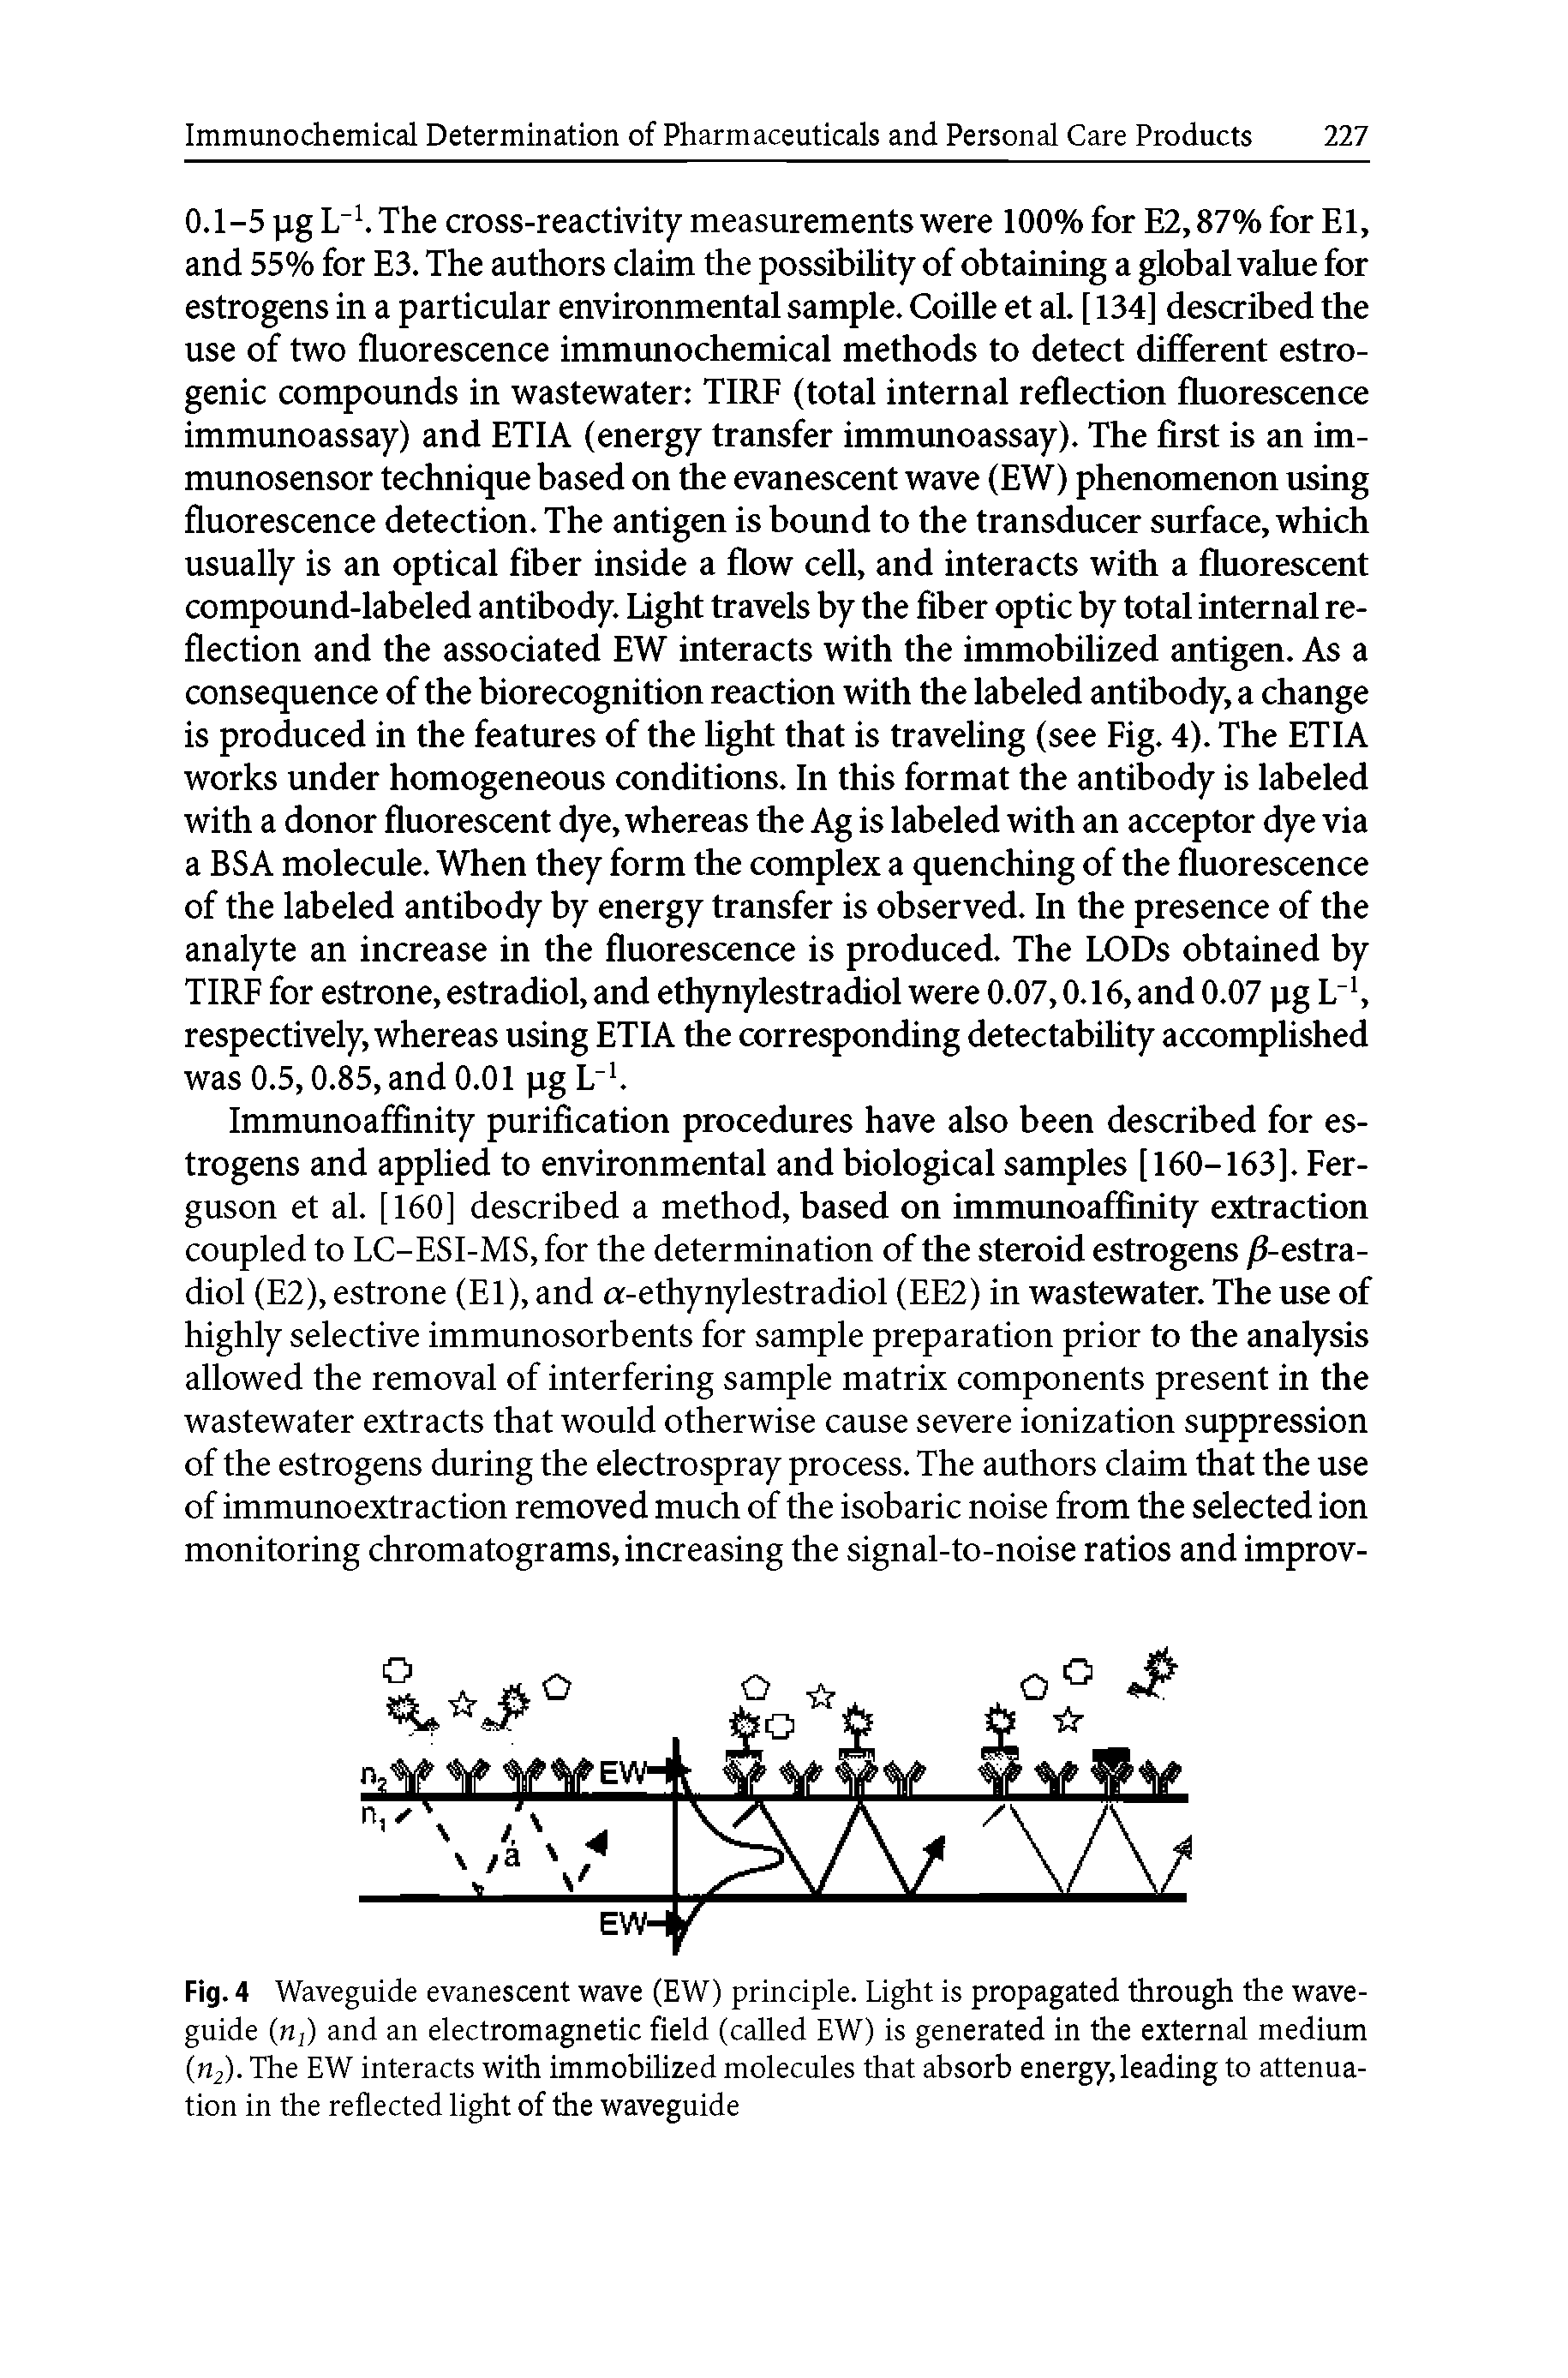 Fig. 4 Waveguide evanescent wave (EW) principle. Light is propagated through the waveguide (n ) and an electromagnetic field (called EW) is generated in the external medium (n2). The EW interacts with immobilized molecules that absorb energy, leading to attenuation in the reflected light of the waveguide...